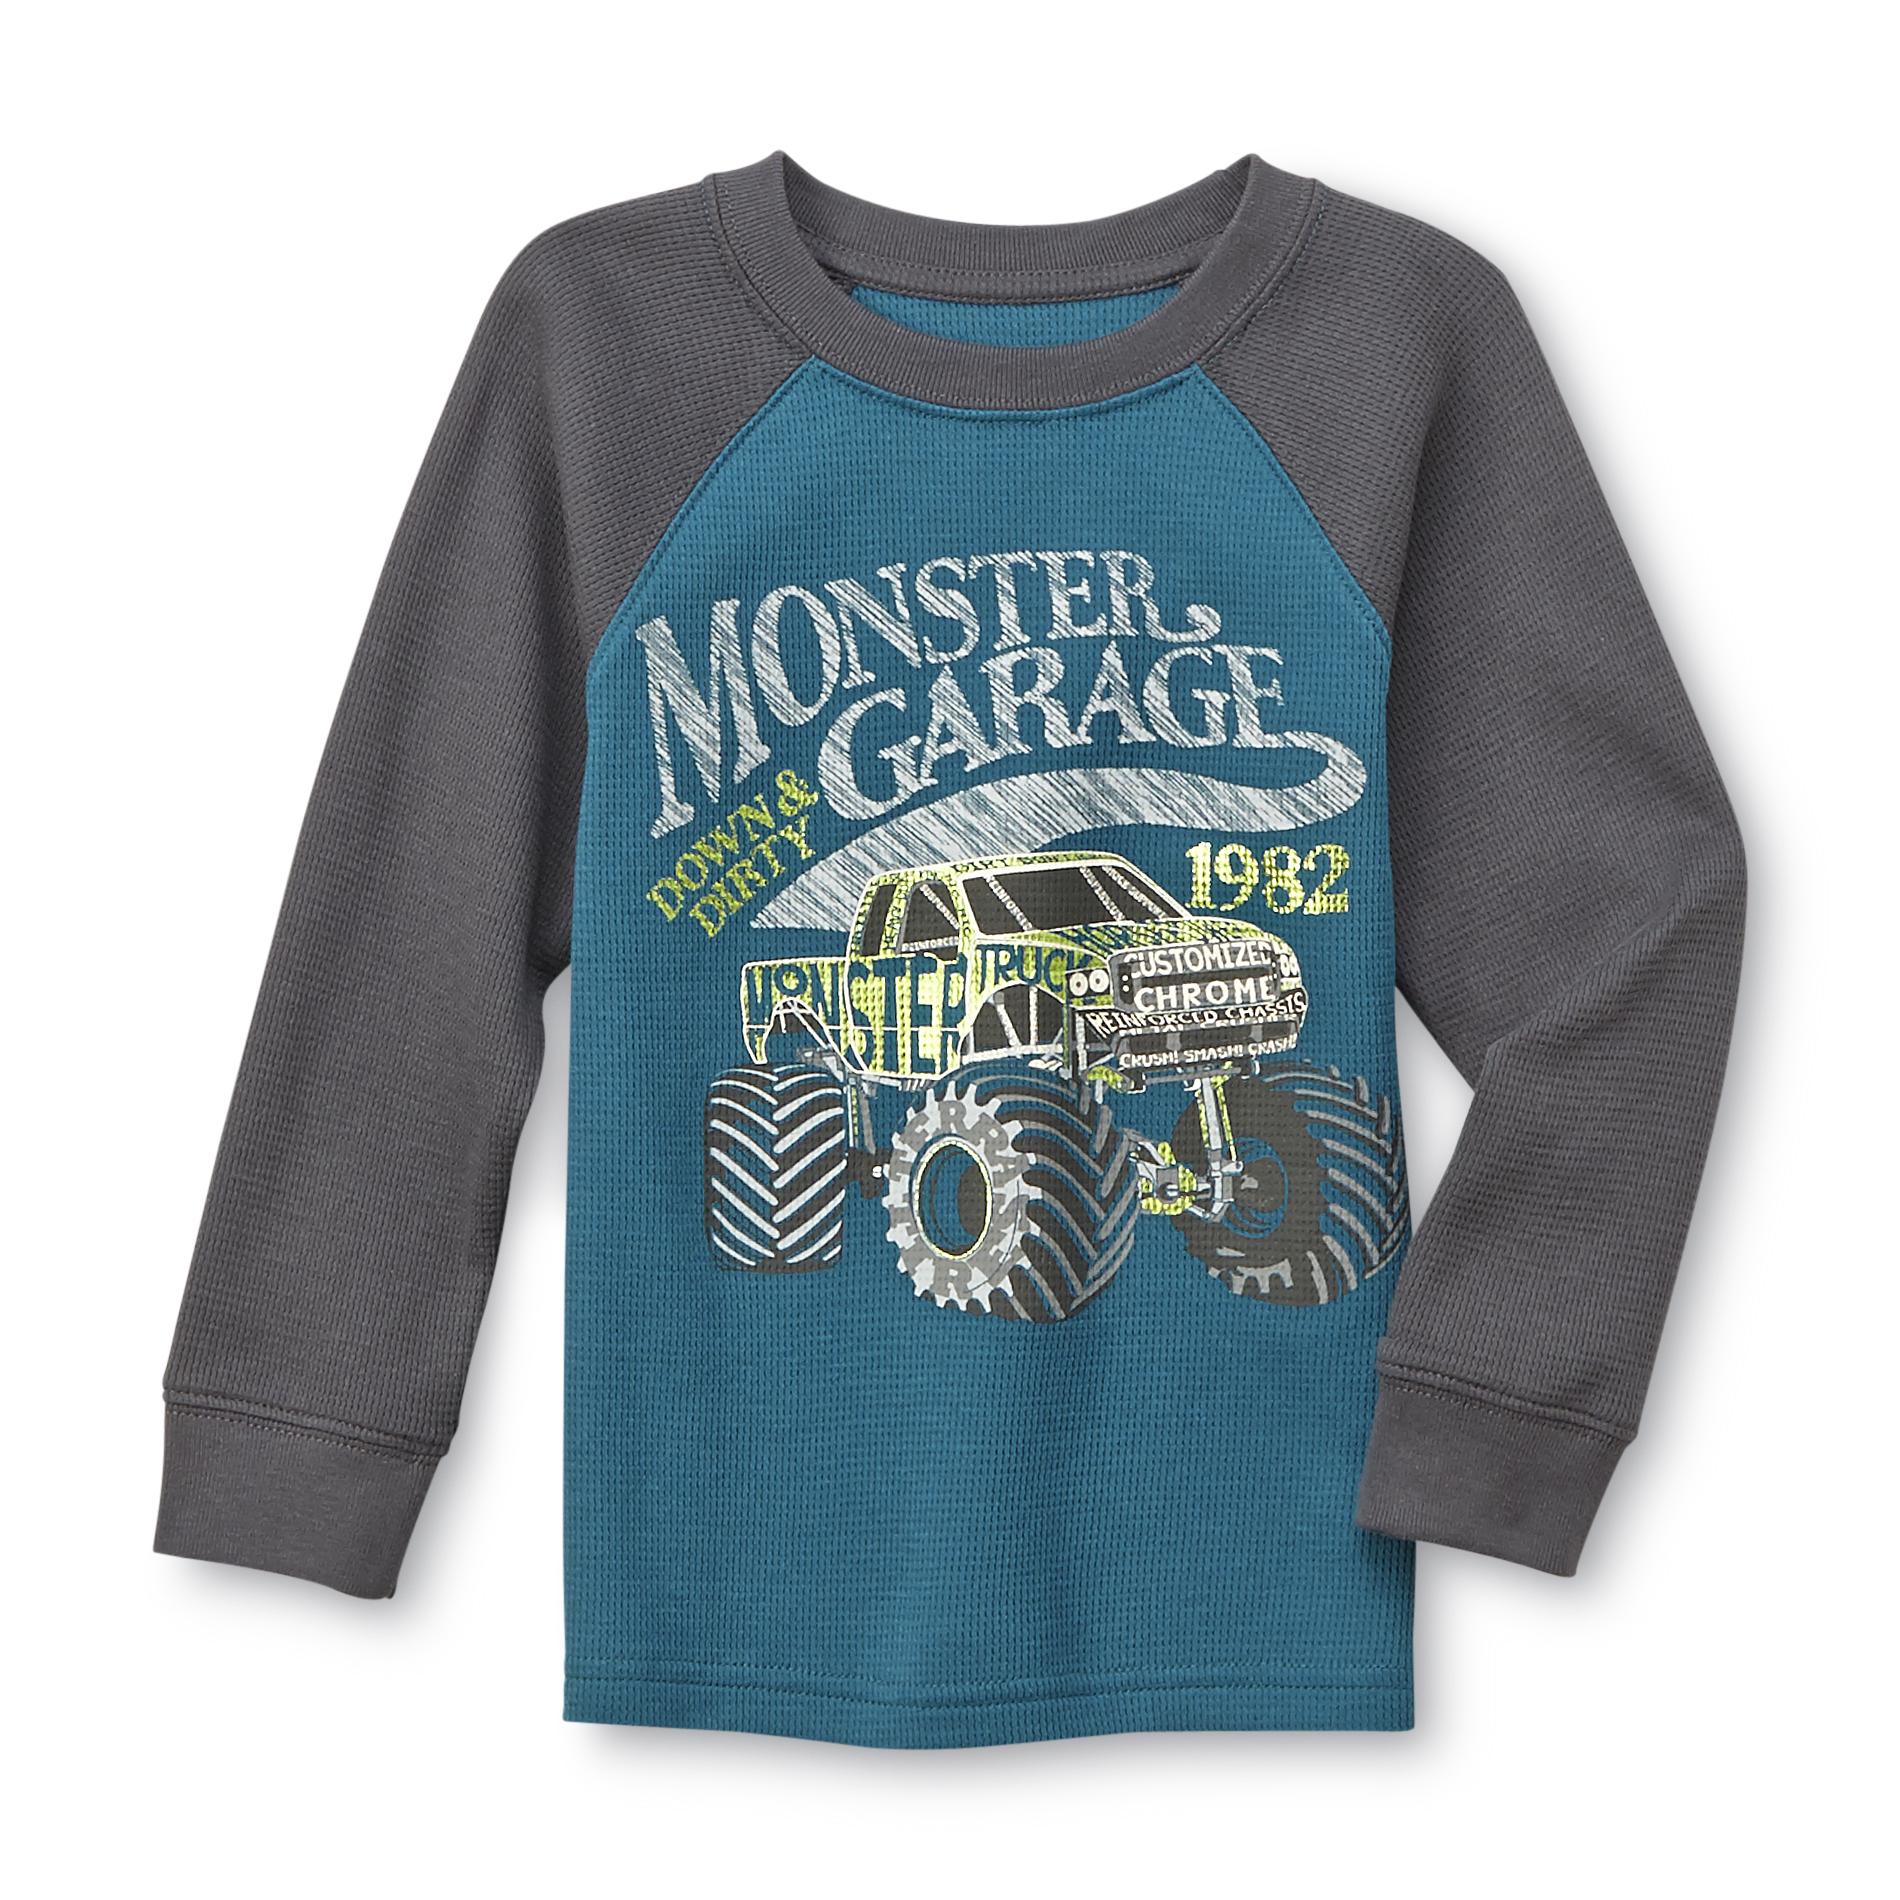 Toughskins Infant & Toddler Boy's Thermal Graphic Shirt - Monster Truck